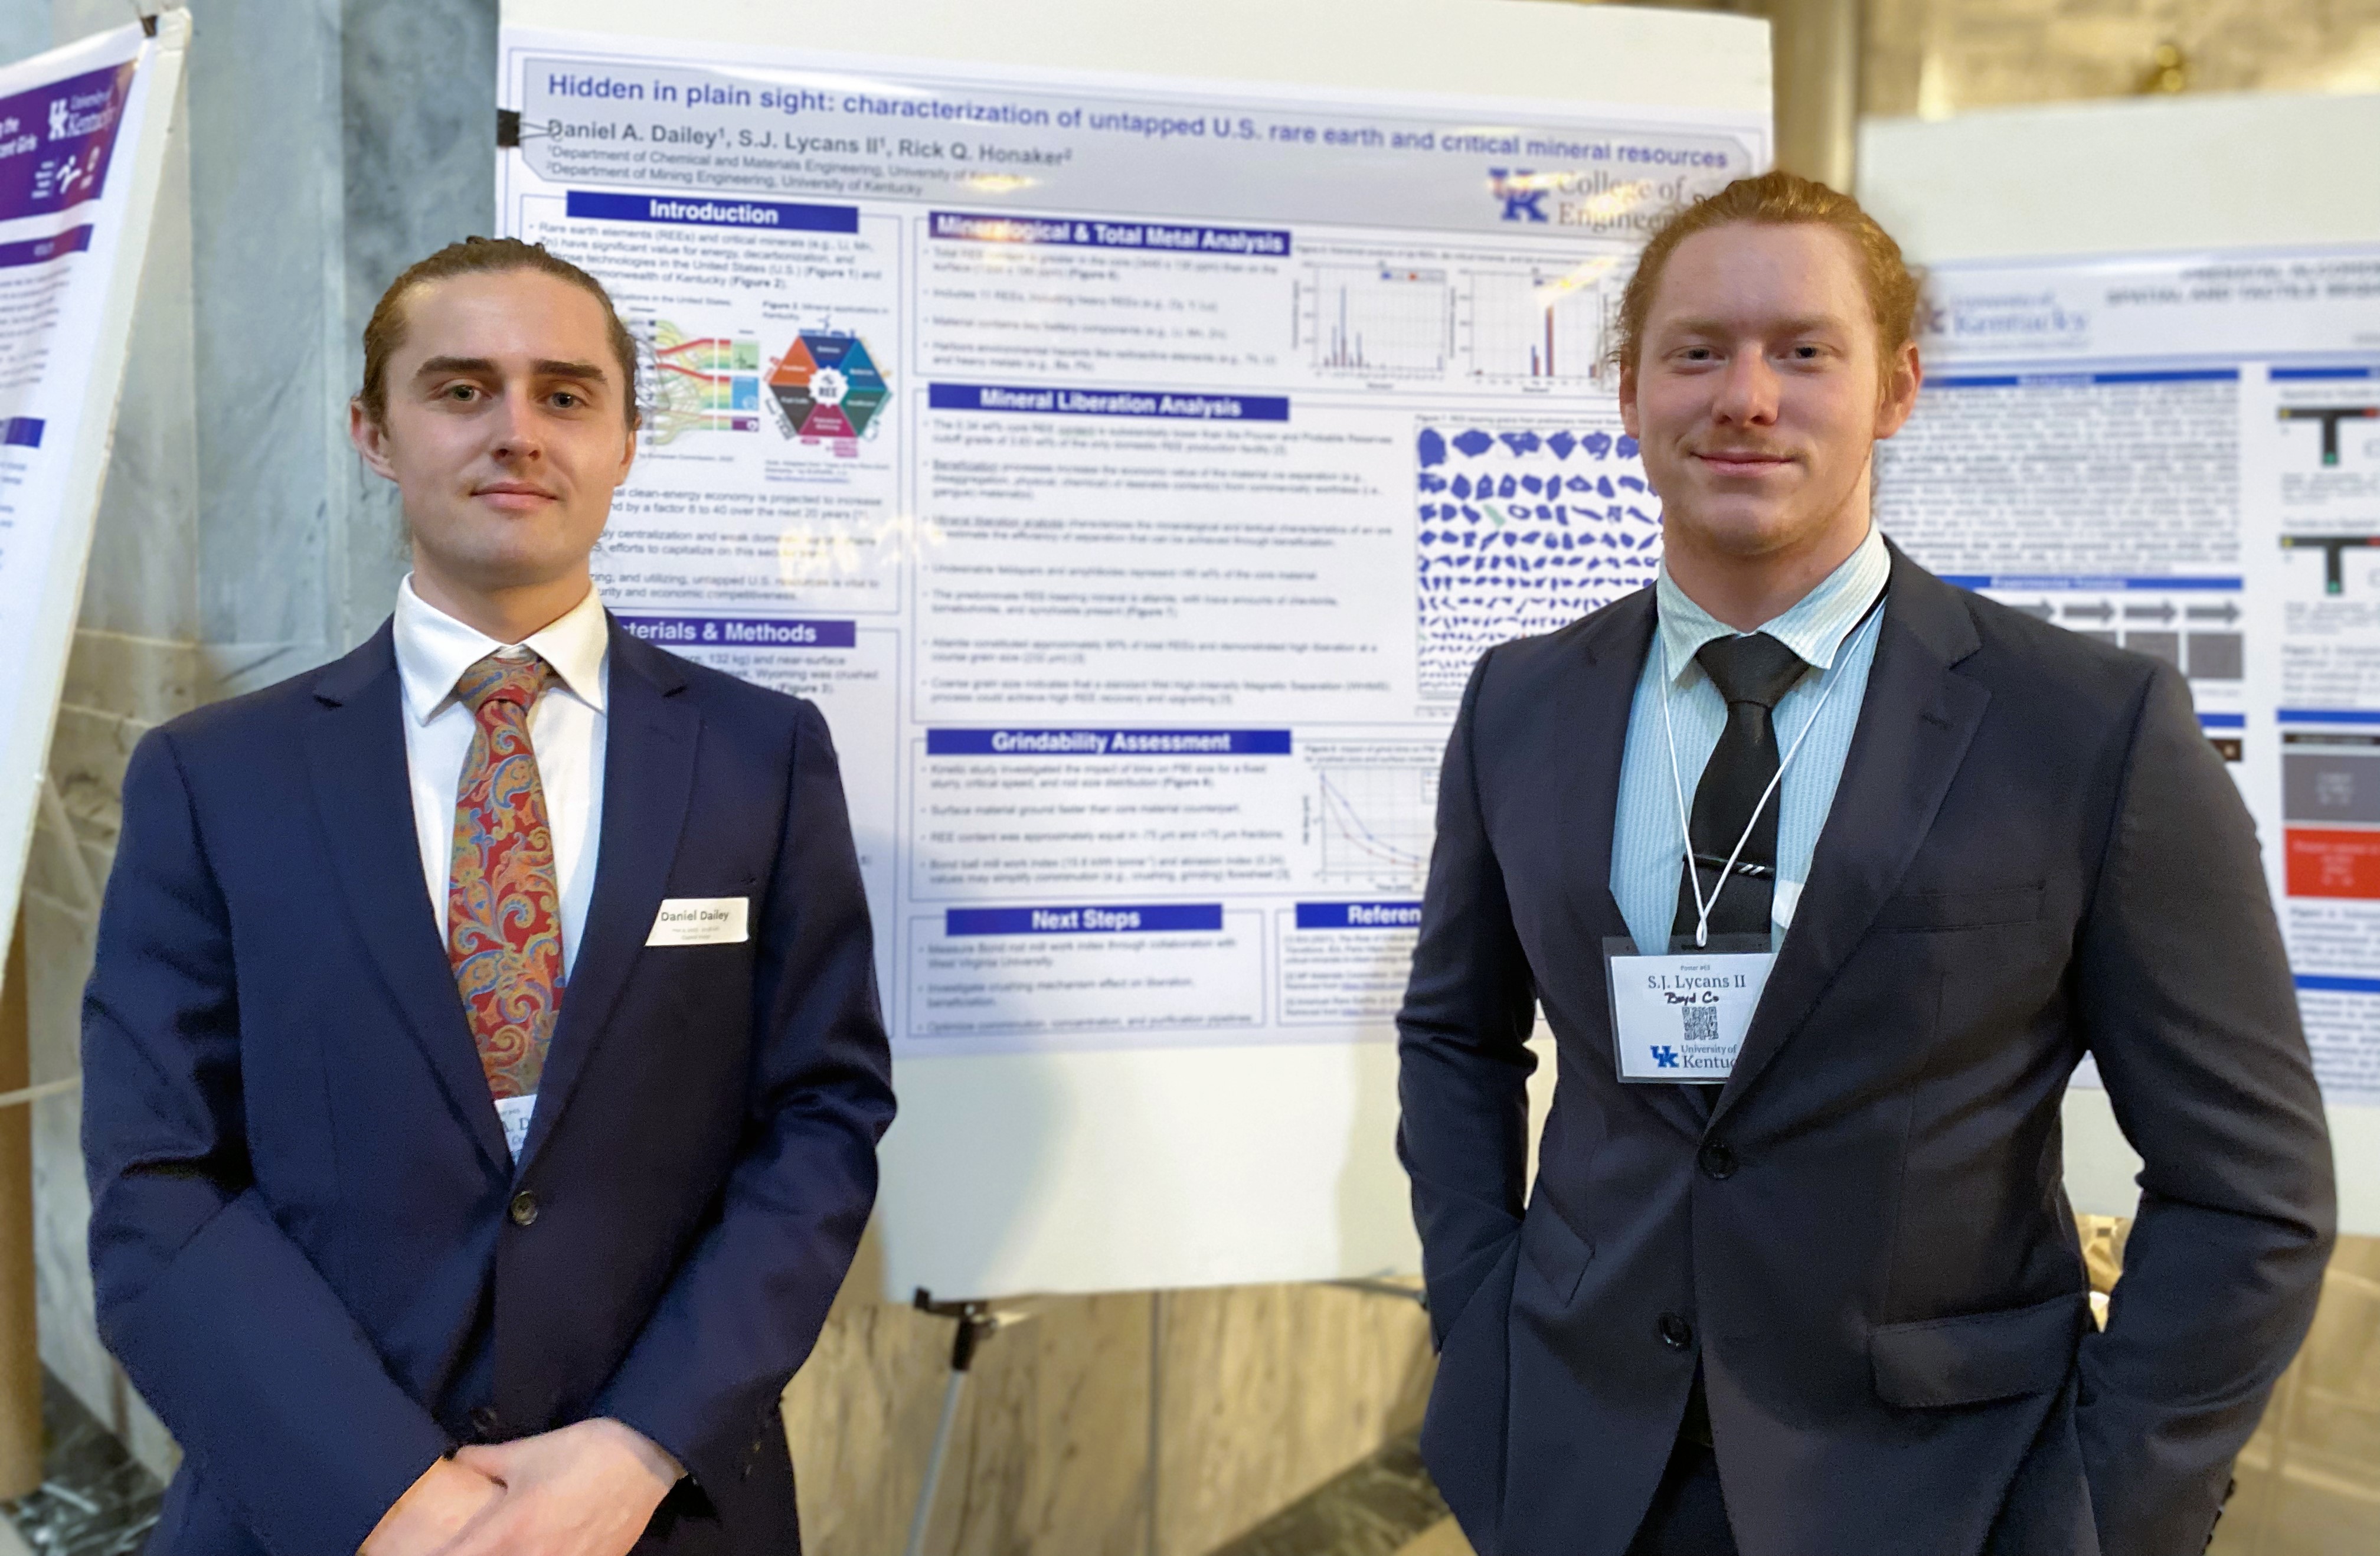 Senior Daniel Dailey and Freshman S.J. Lycans II with their research poster at the Capitol. 